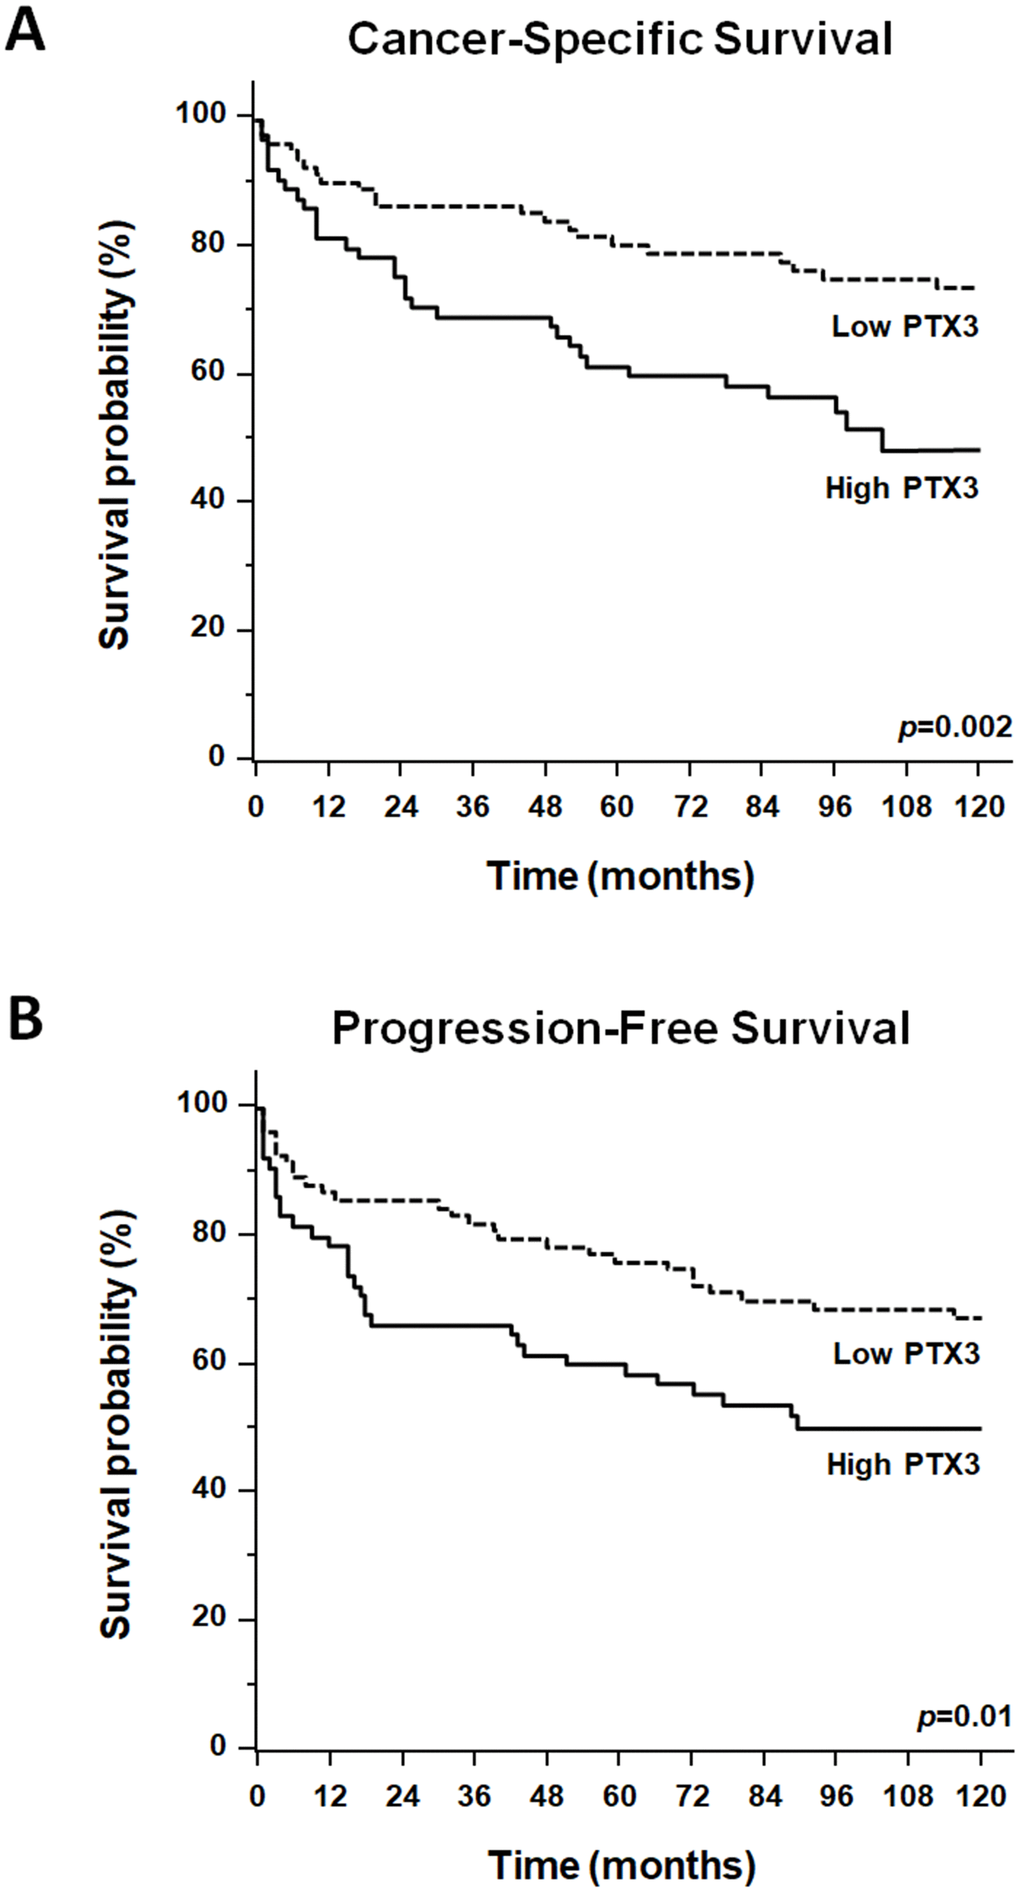 Kaplan-Meier estimate of 12-year cancer-specific survival (CSS: A) and progression-free survival (PFS: B) of ccRCC patients according to different PTX3 serum levels at baseline.